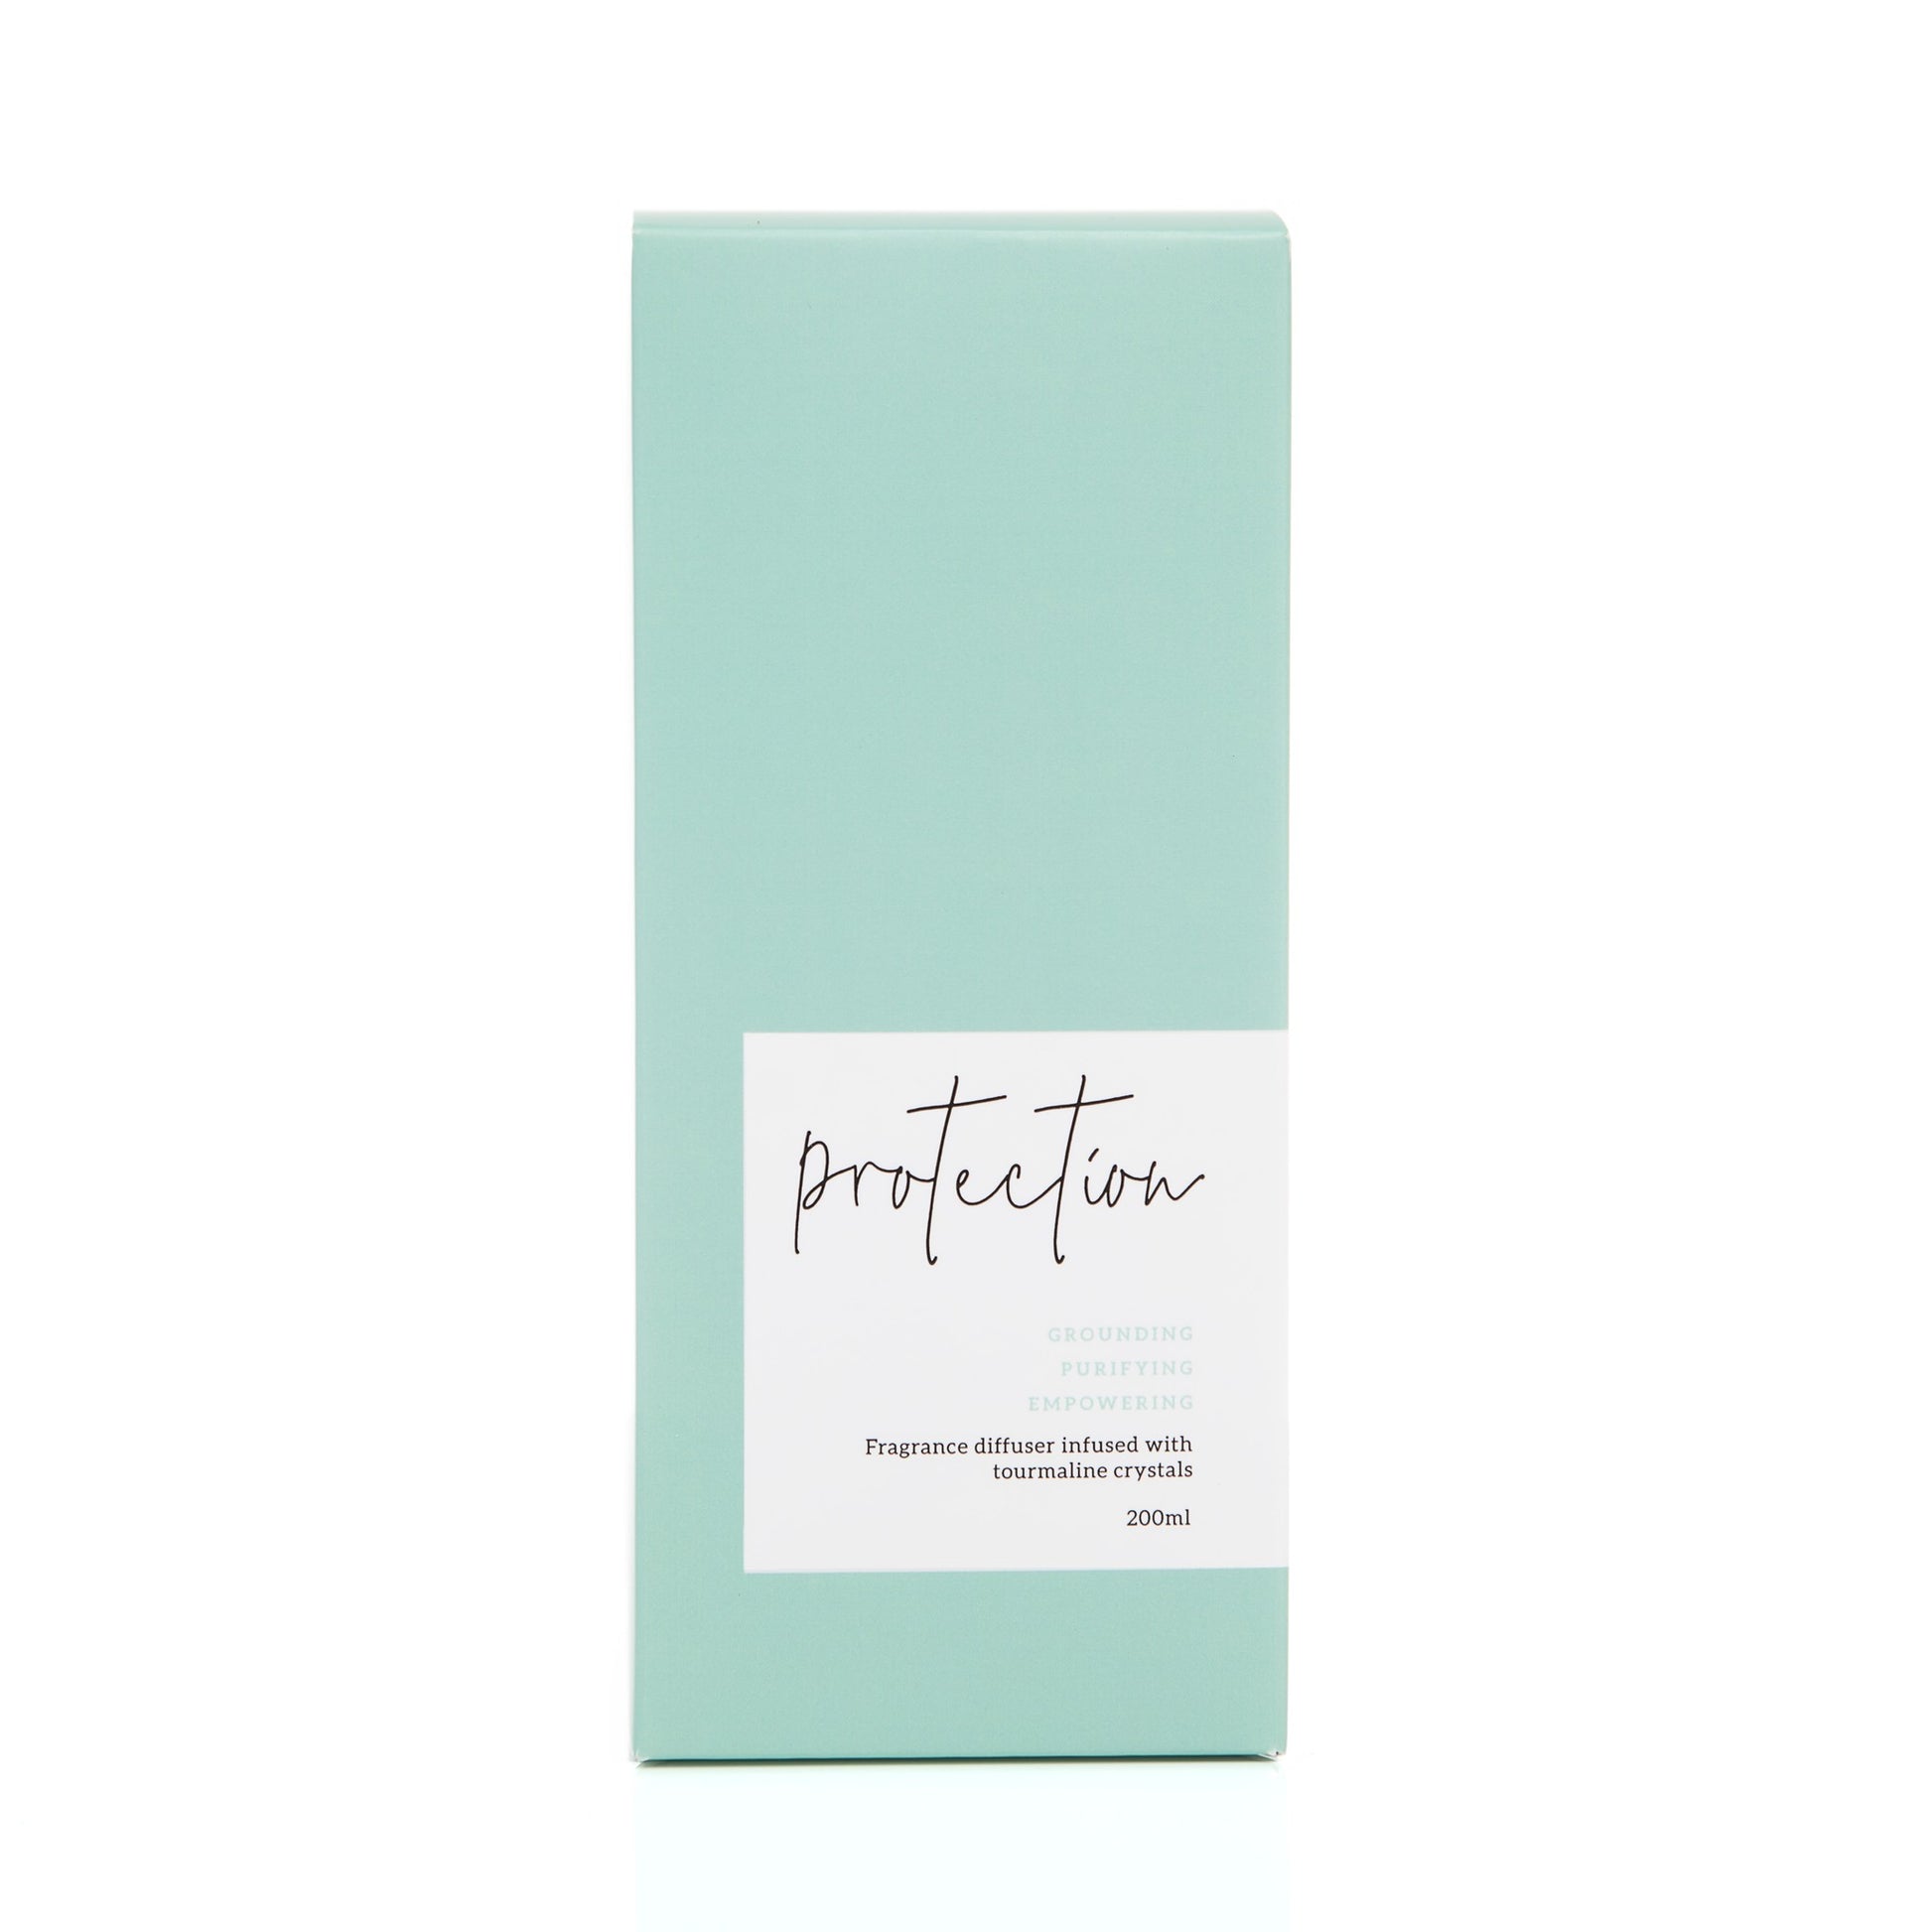 protection reed diffuser in pastel green box